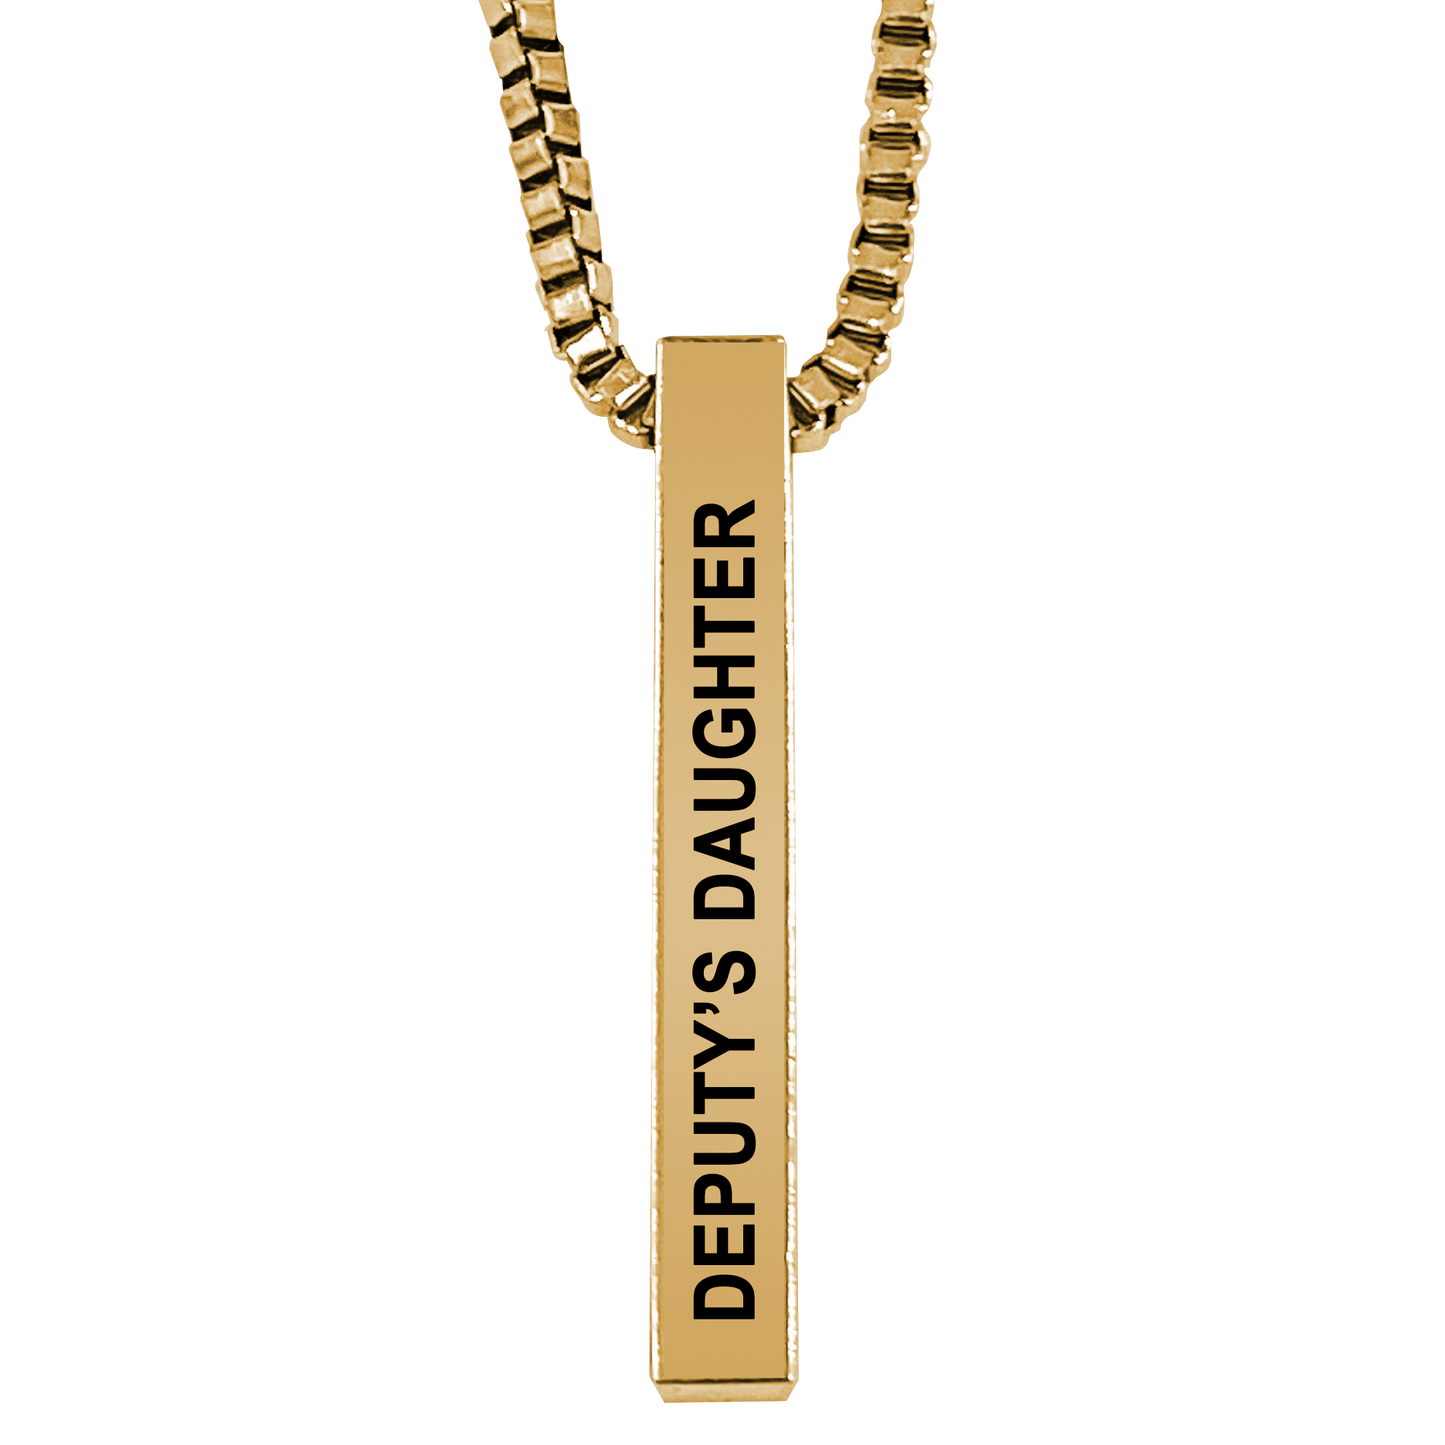 Deputy's Daughter Gold Plated Pillar Bar Pendant Necklace Gift Mother's Day Christmas Holiday Anniversary Police Sheriff Officer First Responder Law Enforcement